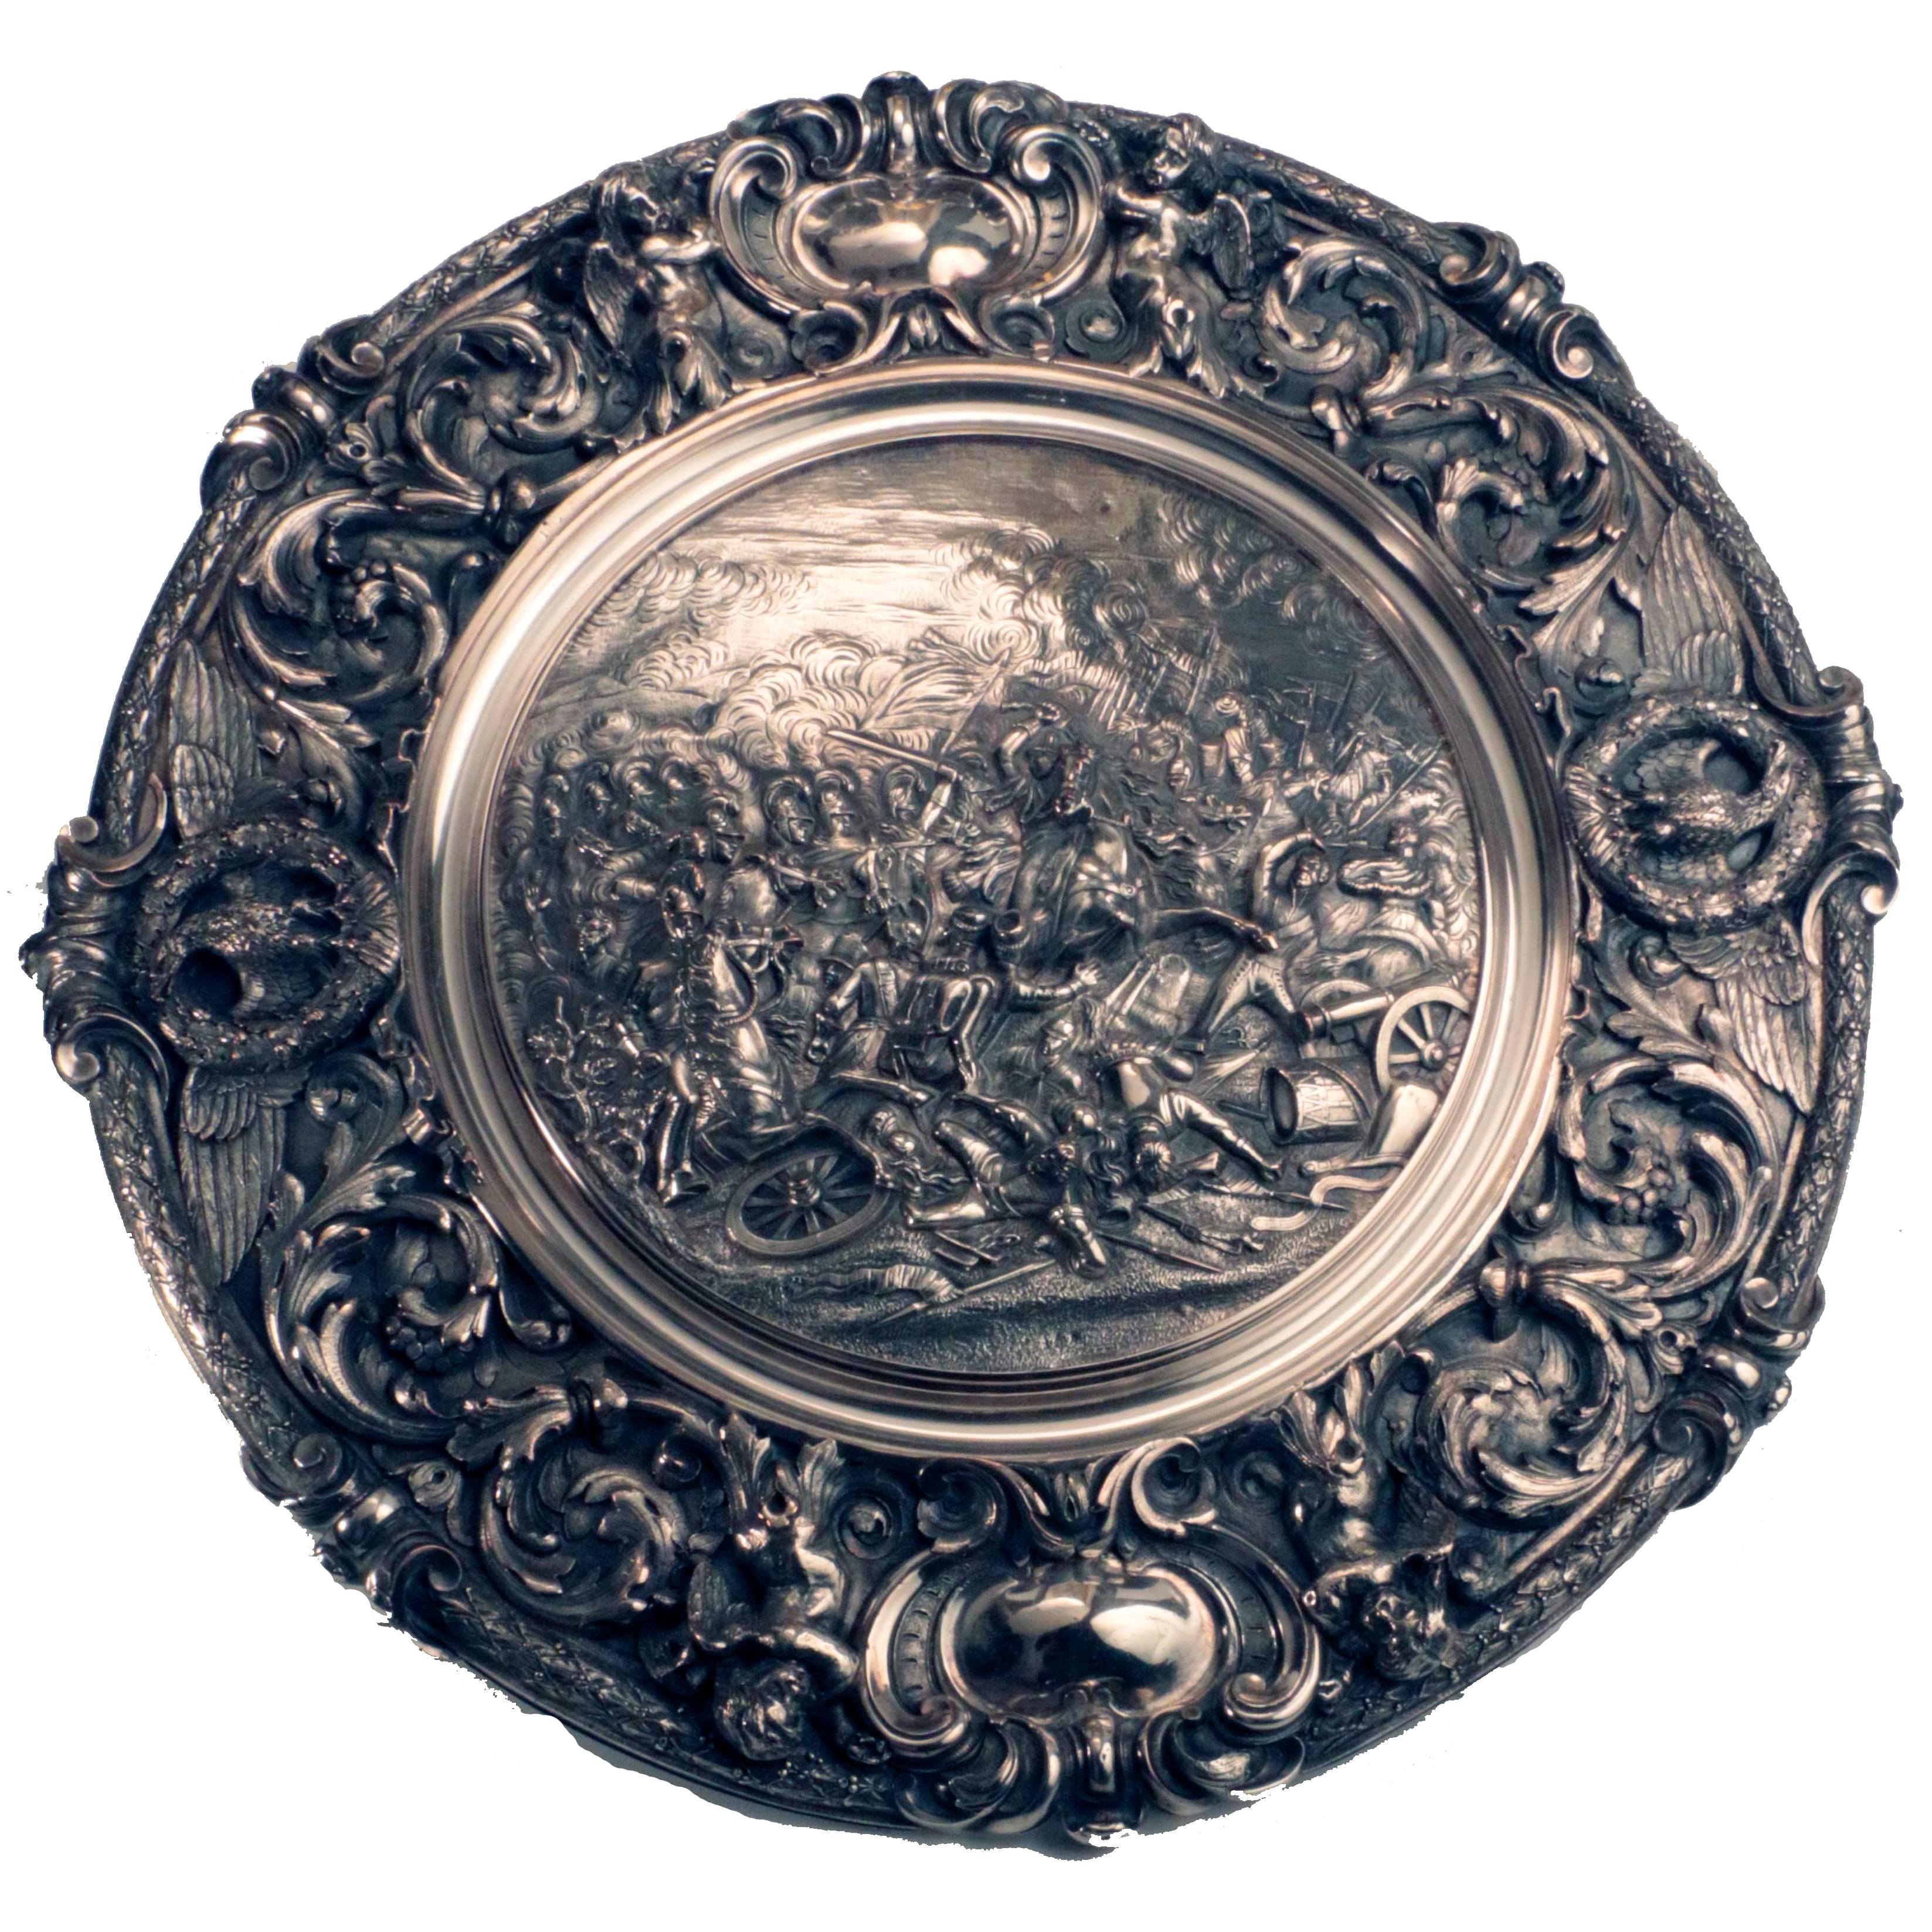 Sumptuous Sideboard Dish, Cast with a Cavalry Charge at Waterloo